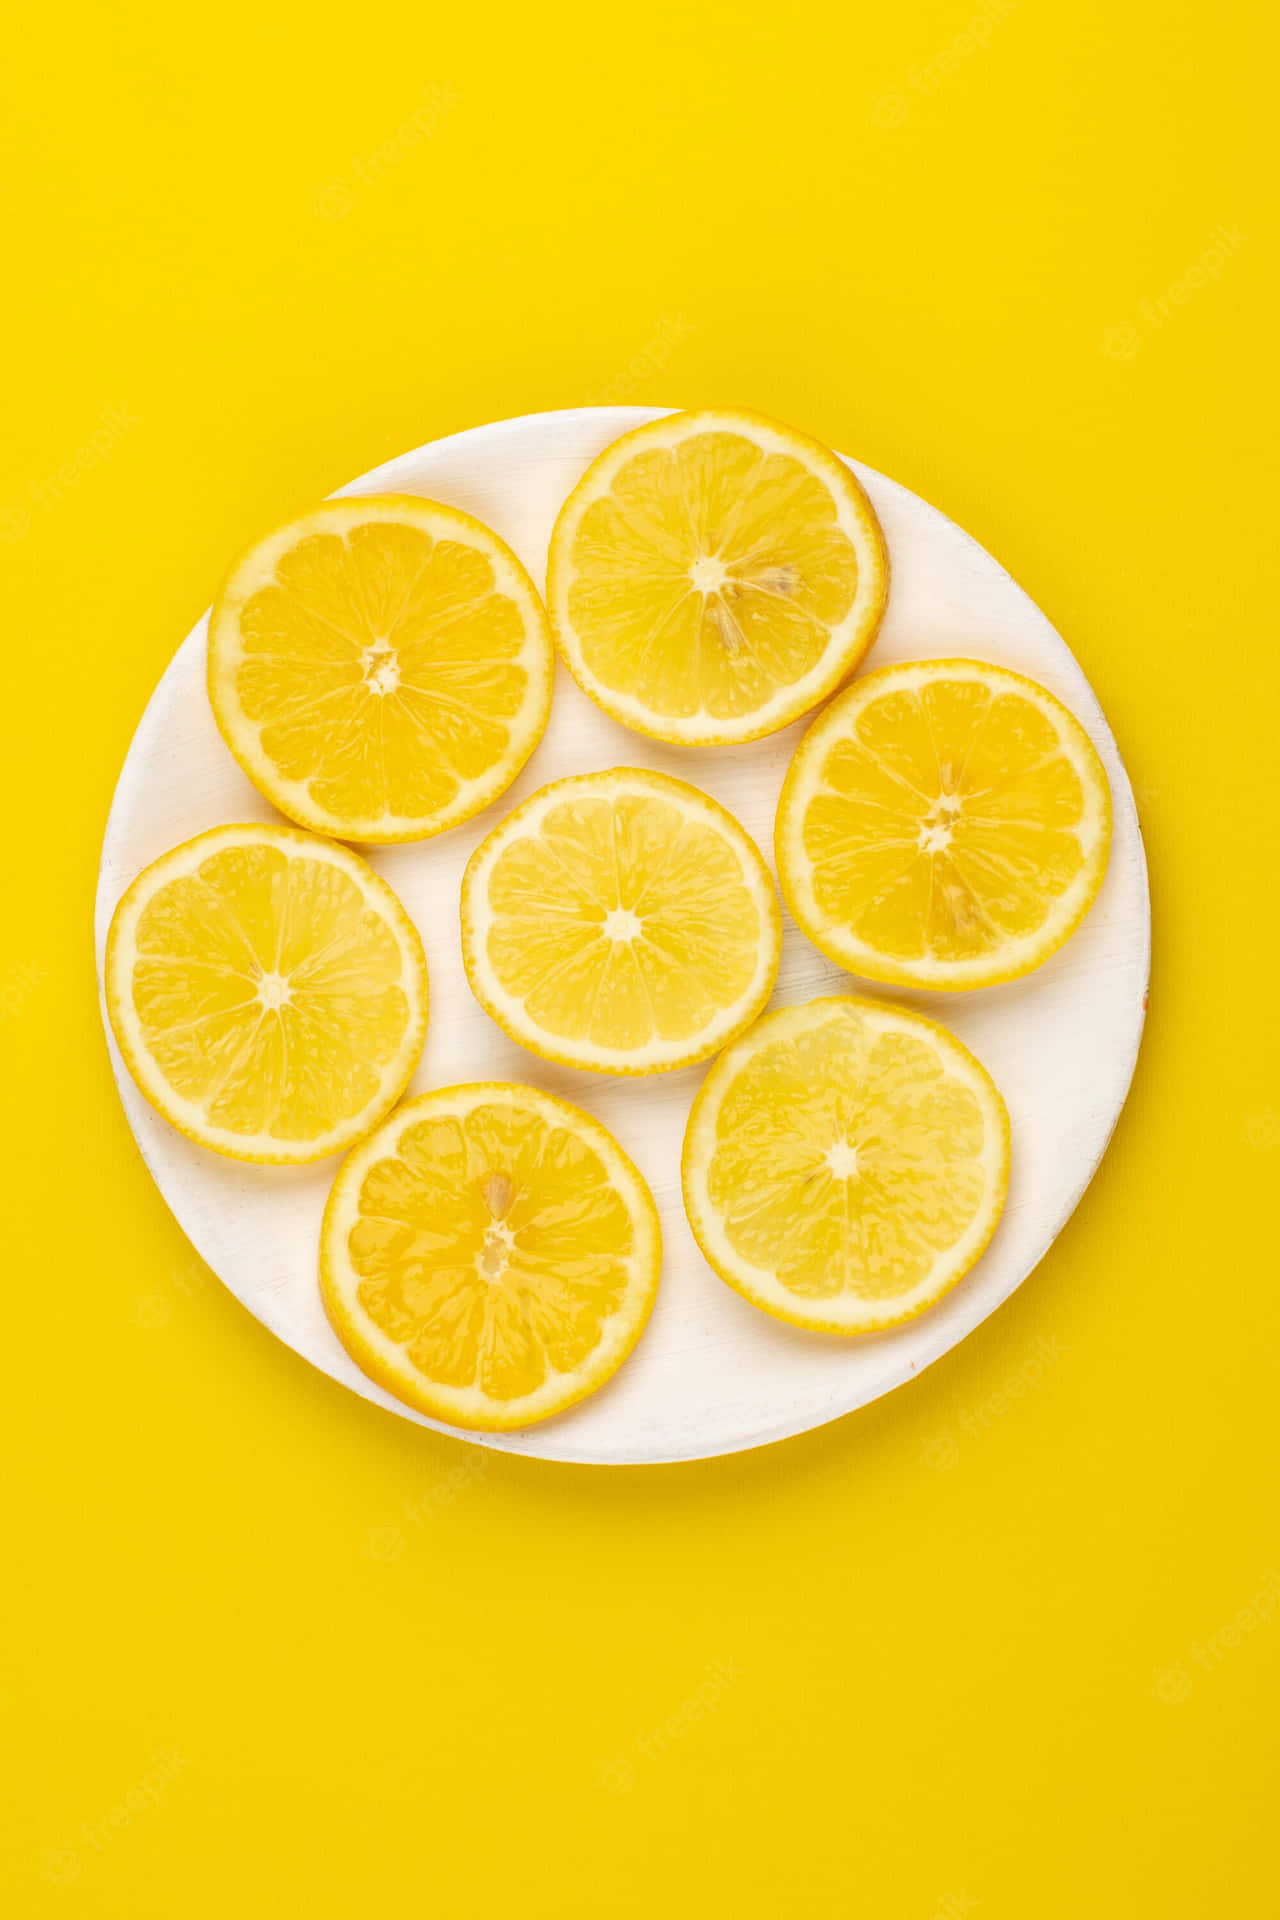 Lemon Slices On Plate Yellow Background Iphone Wallpaper